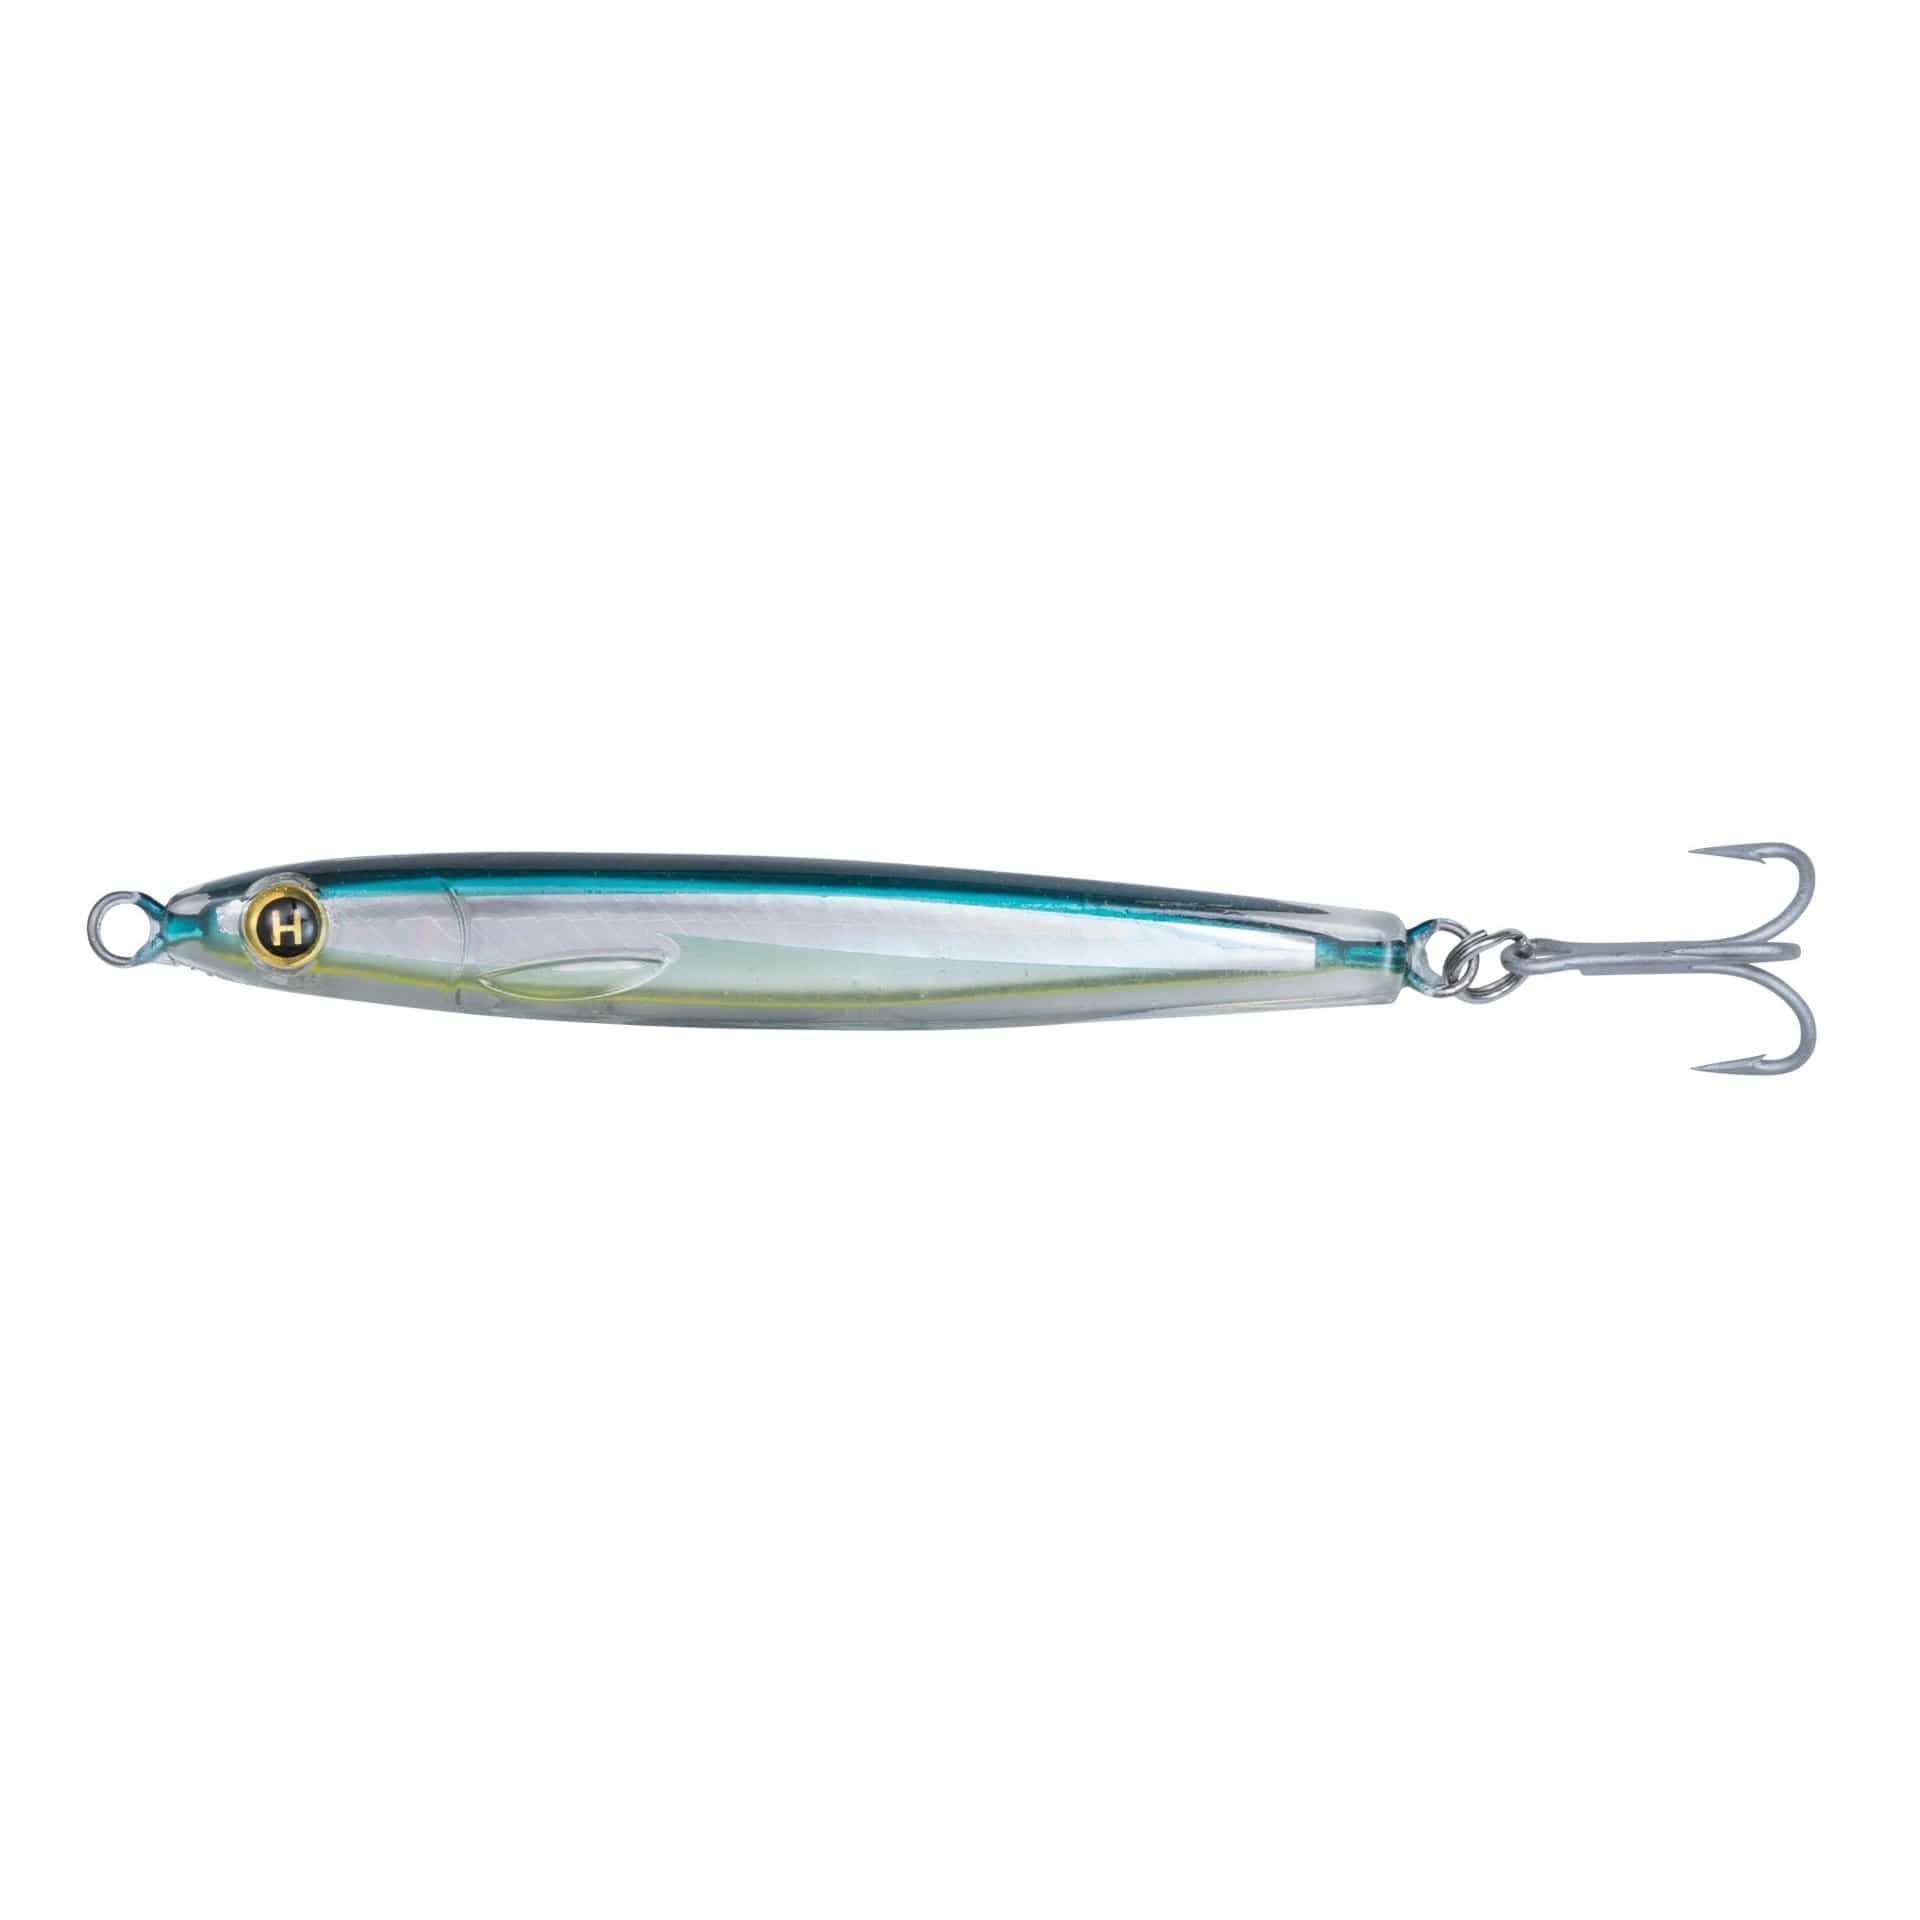 Top Lure Brands Tagged Lures - The Saltwater Edge